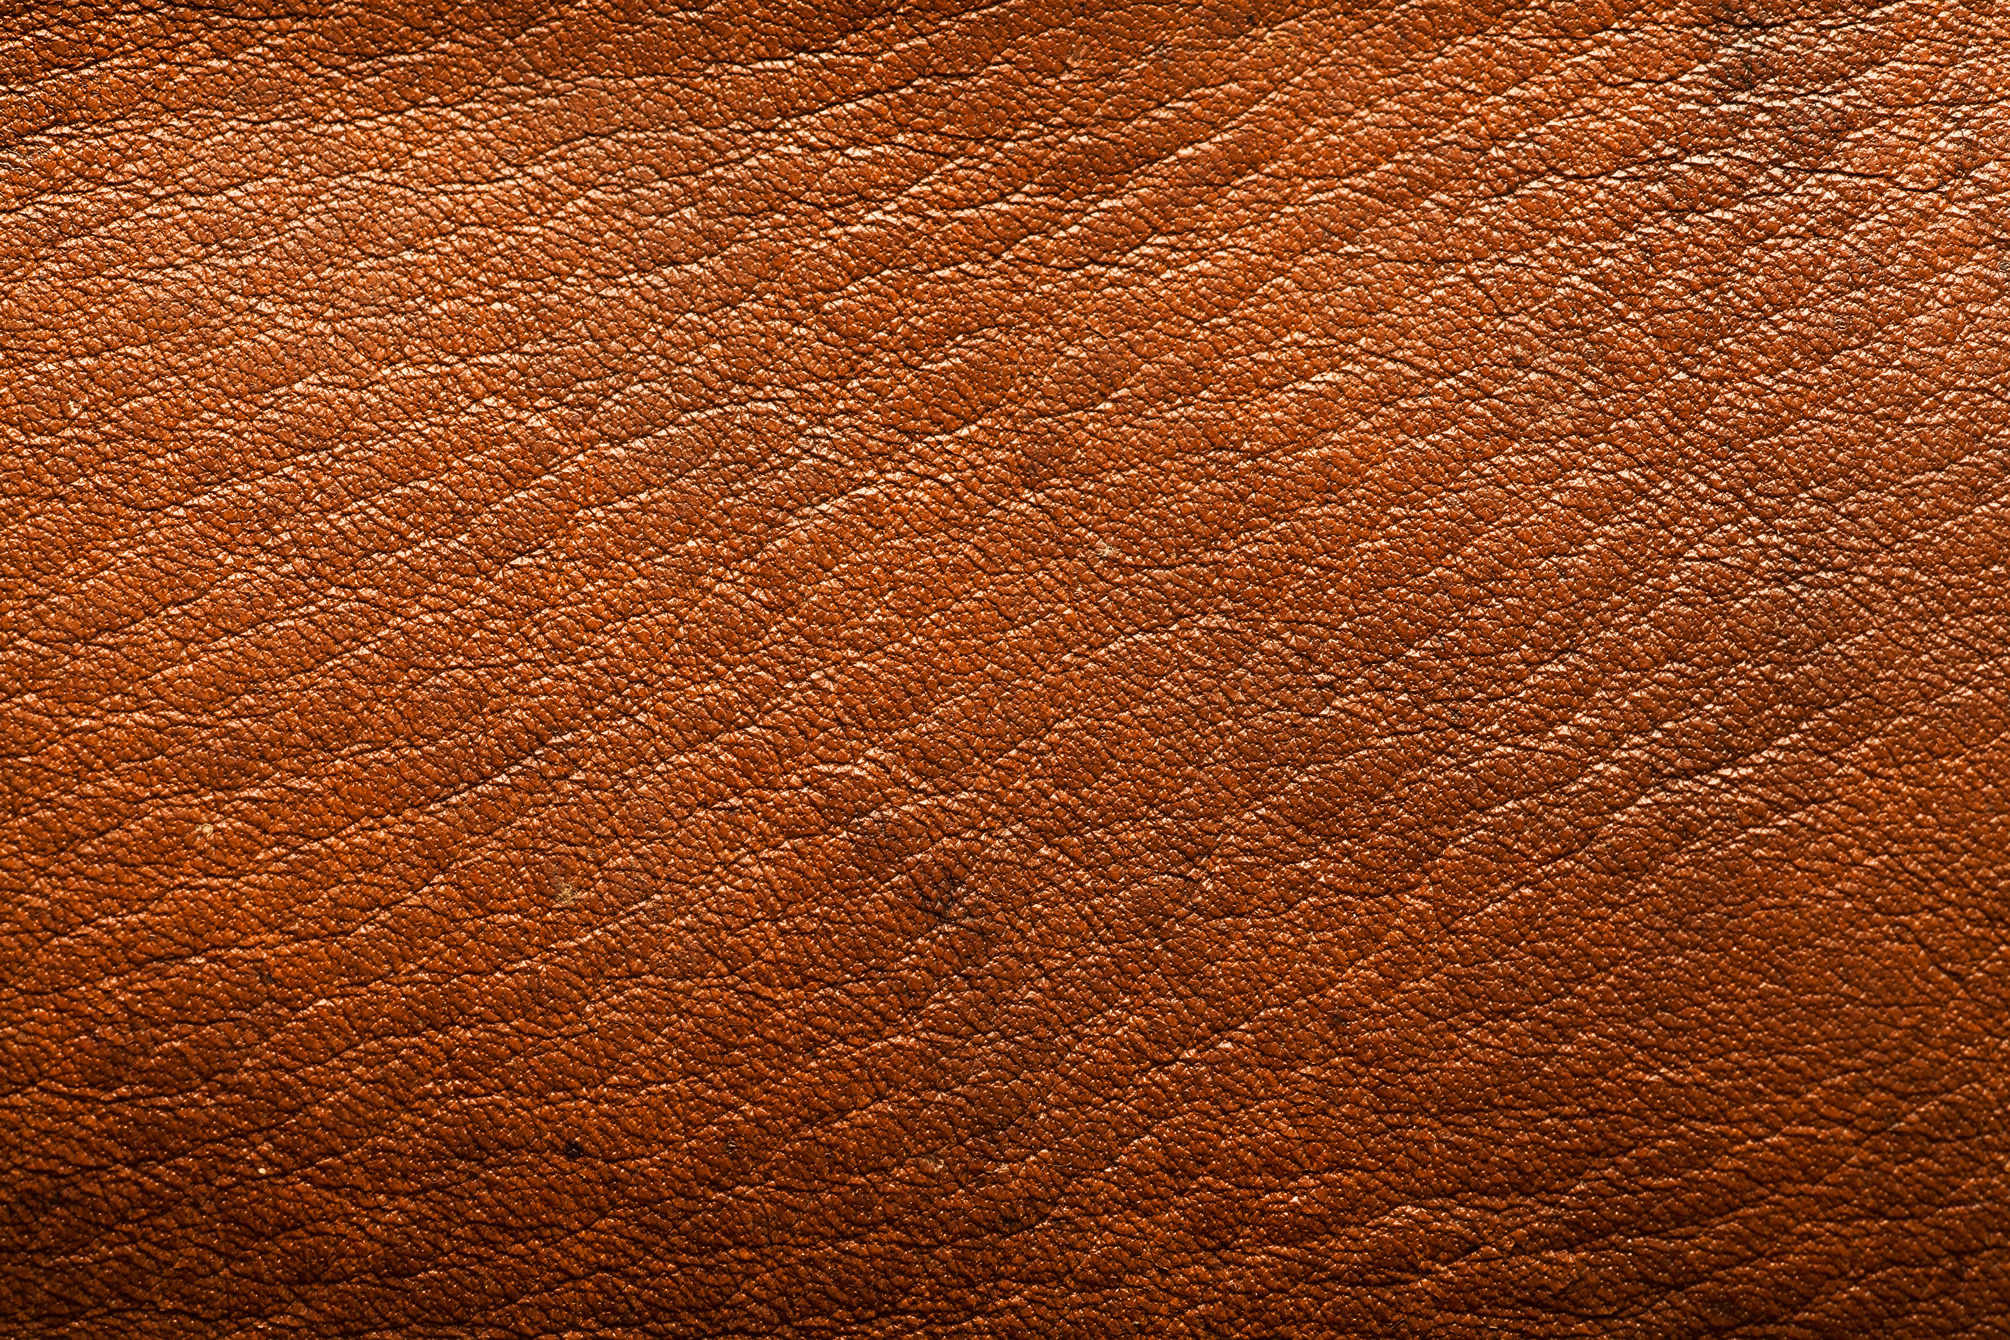 brown leather texture, background, leather background, leather background